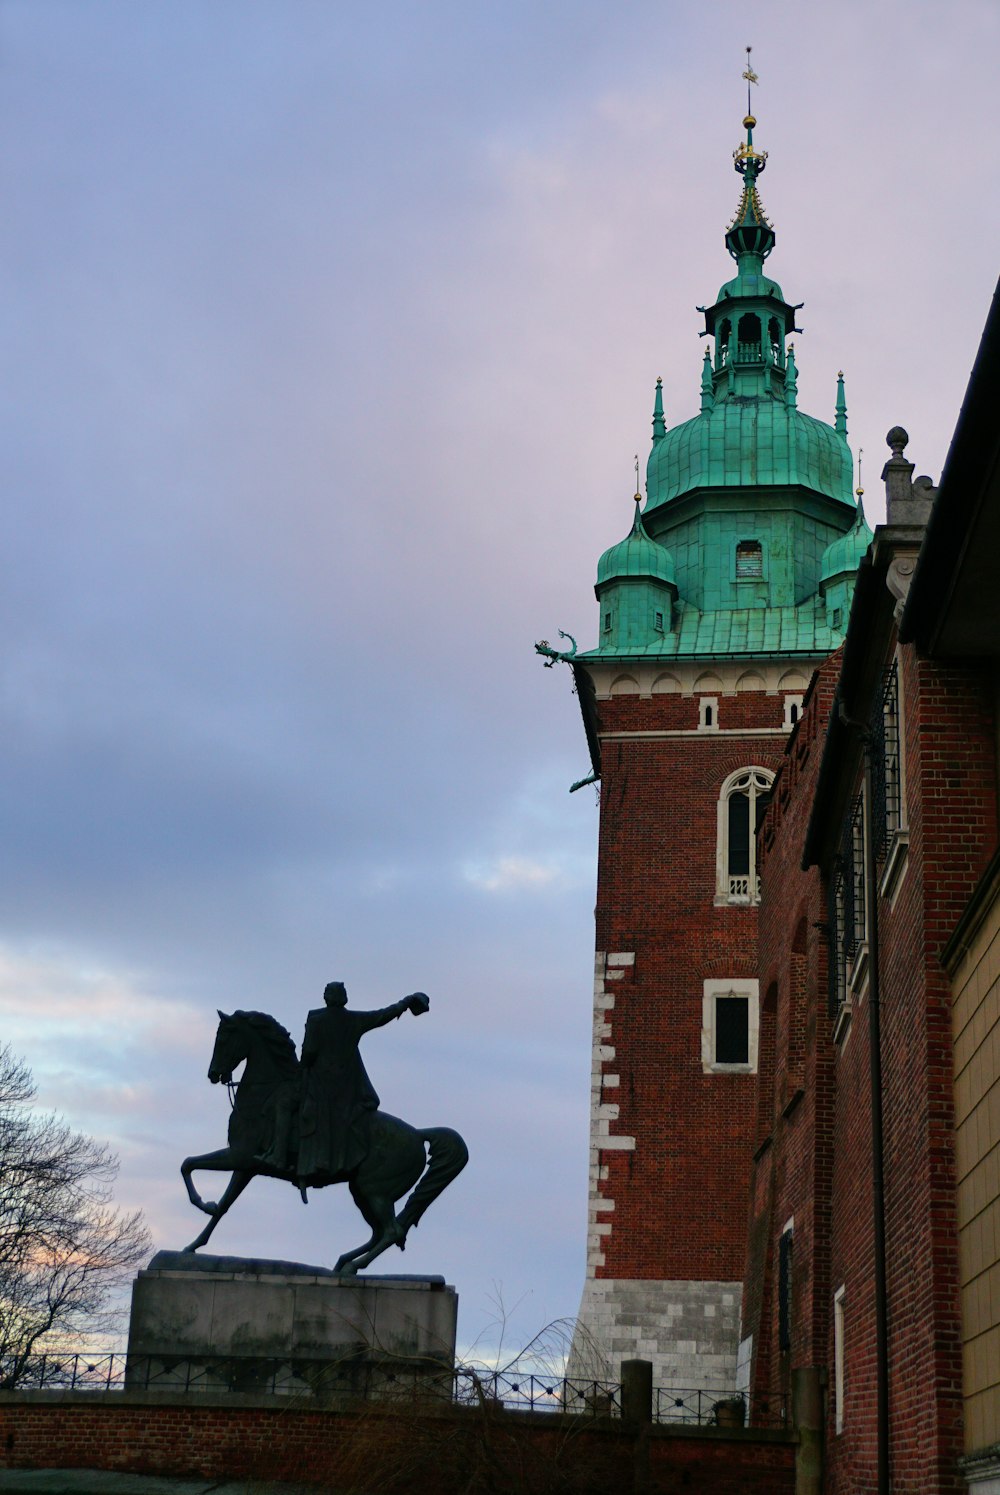 a statue of a man on a horse in front of a building